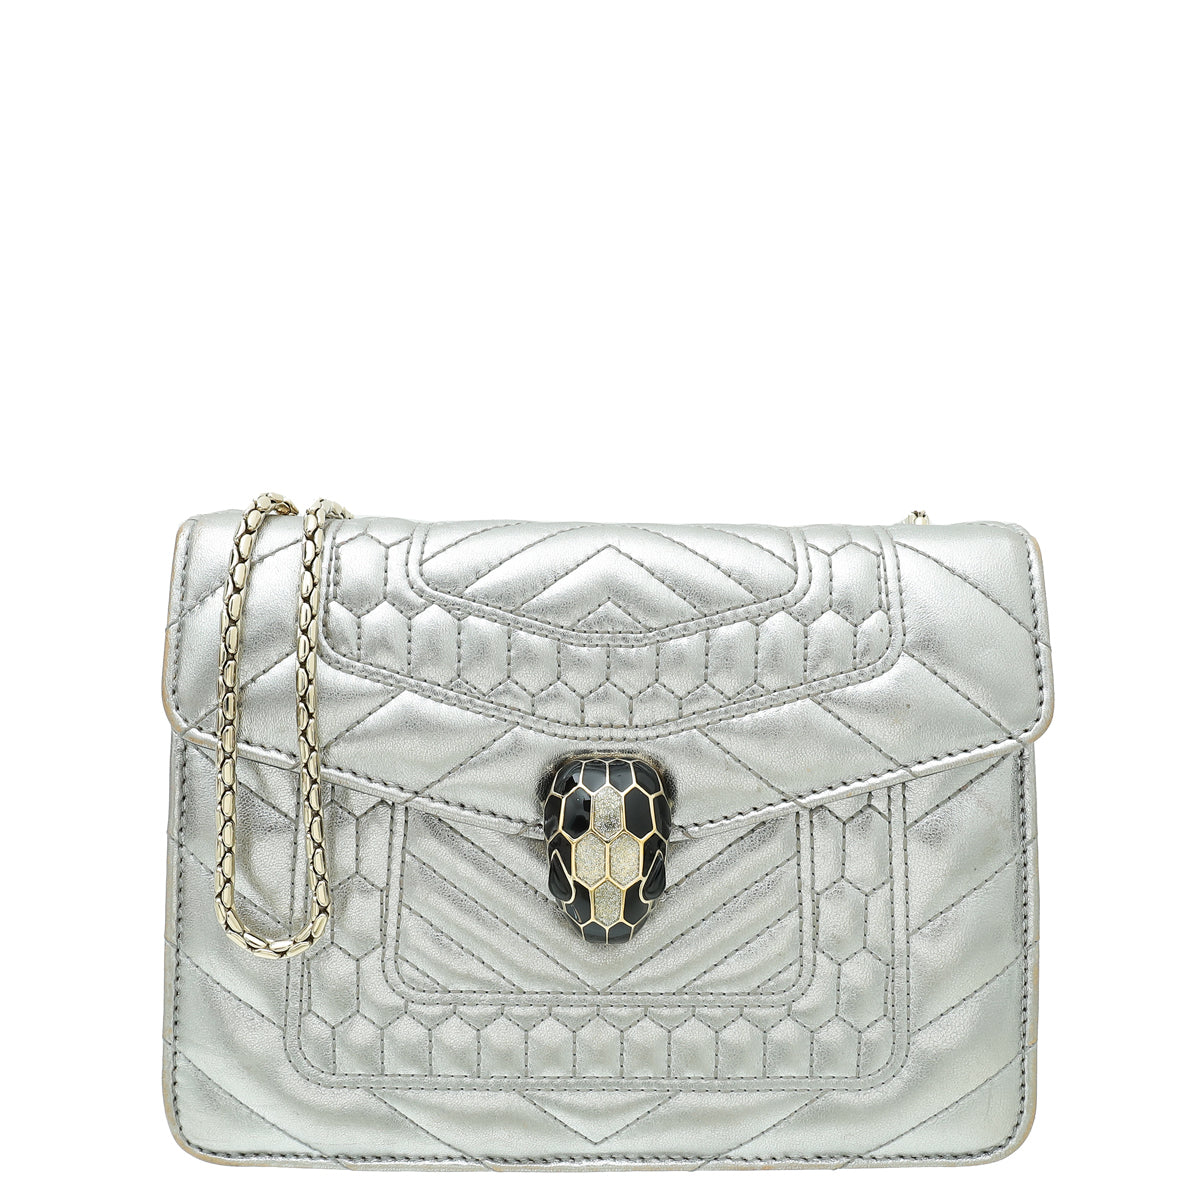 Bvlgari Metallic Silver Serpenti Forever Quilted Scaglie Flap Bag